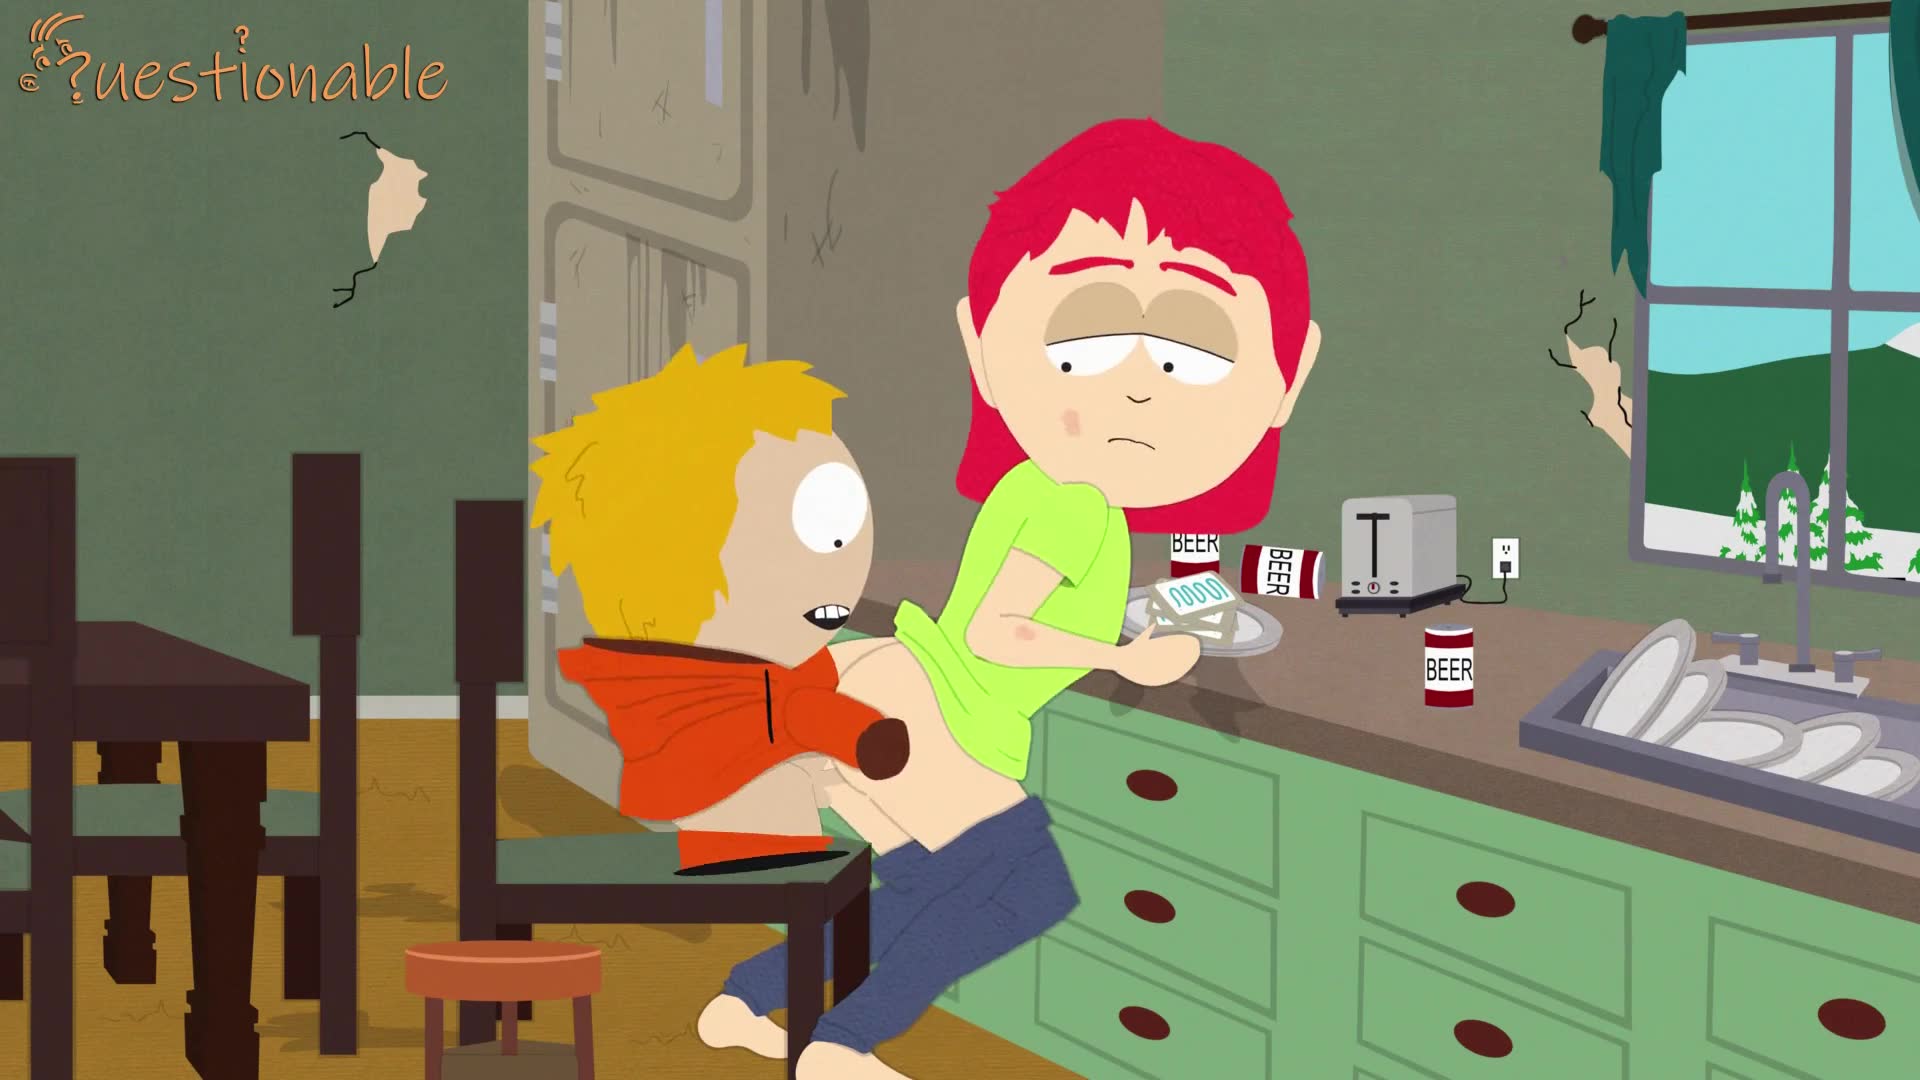 Discover which South Park character would be the best partner in crime in the bedroom